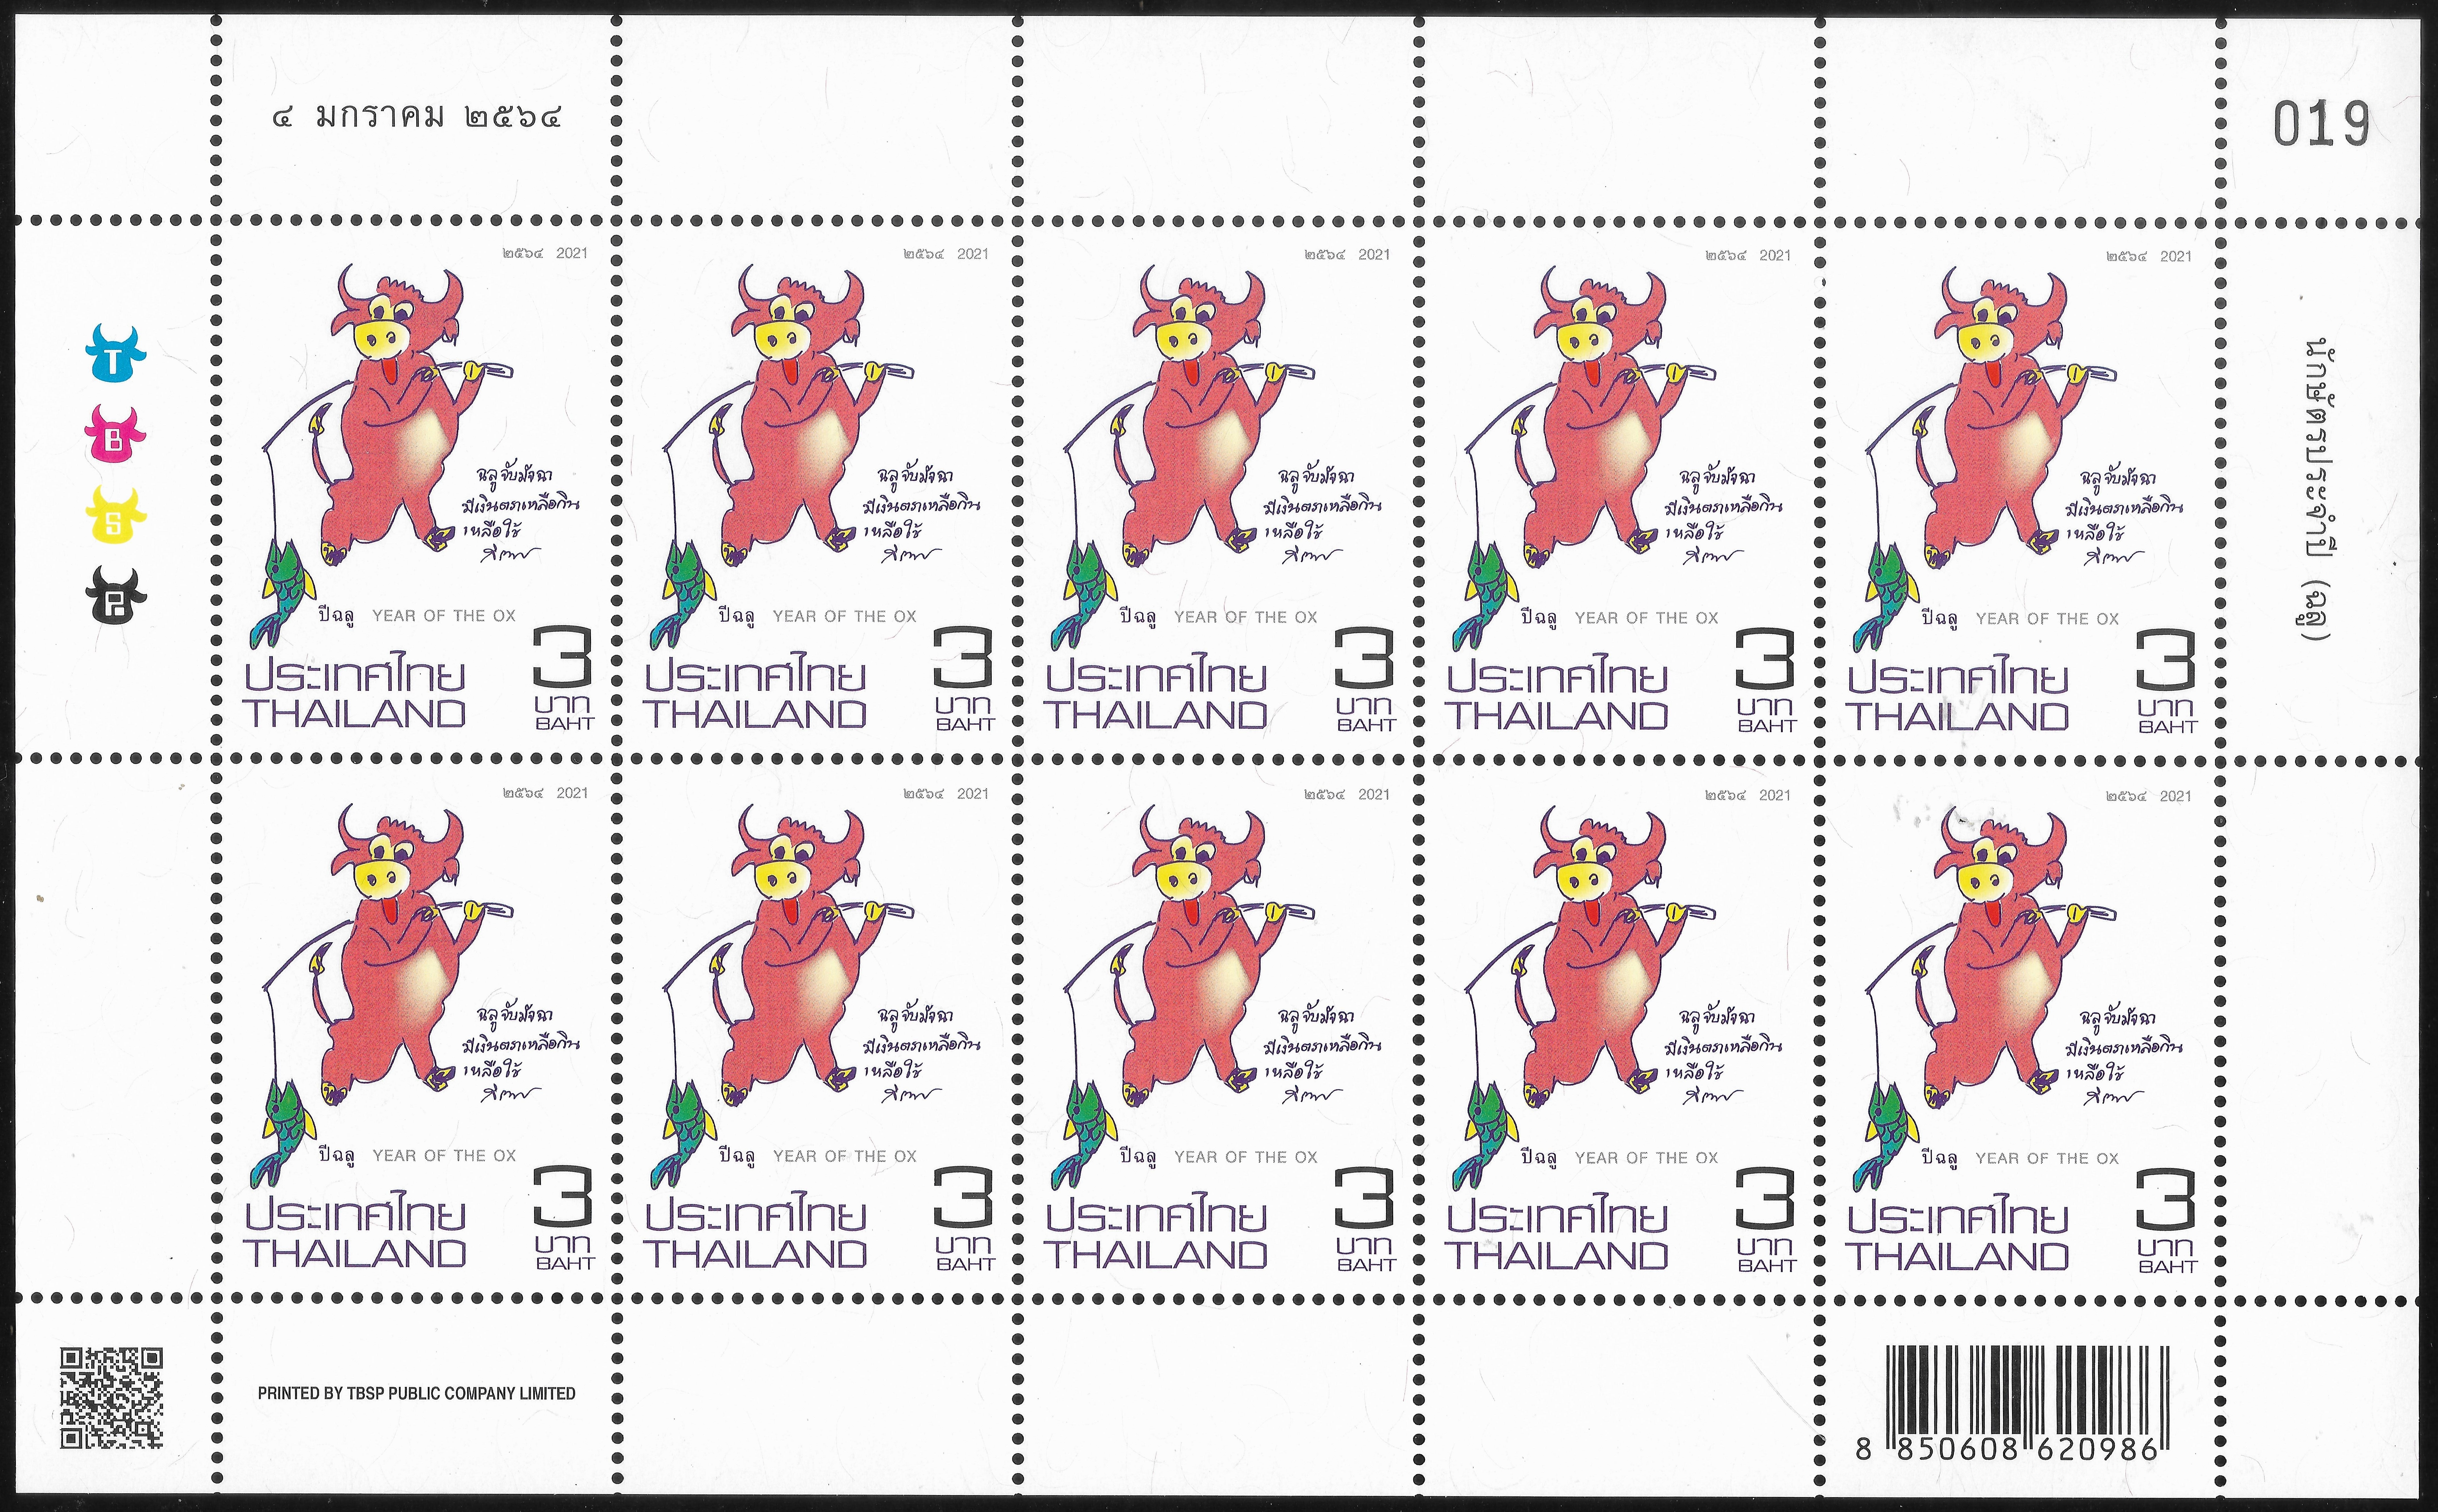 Thailand: Year of the Ox, 4 January 2021 [full sheet of 10 stamps; 1200 dpi scan by Mark Joseph Jochim]